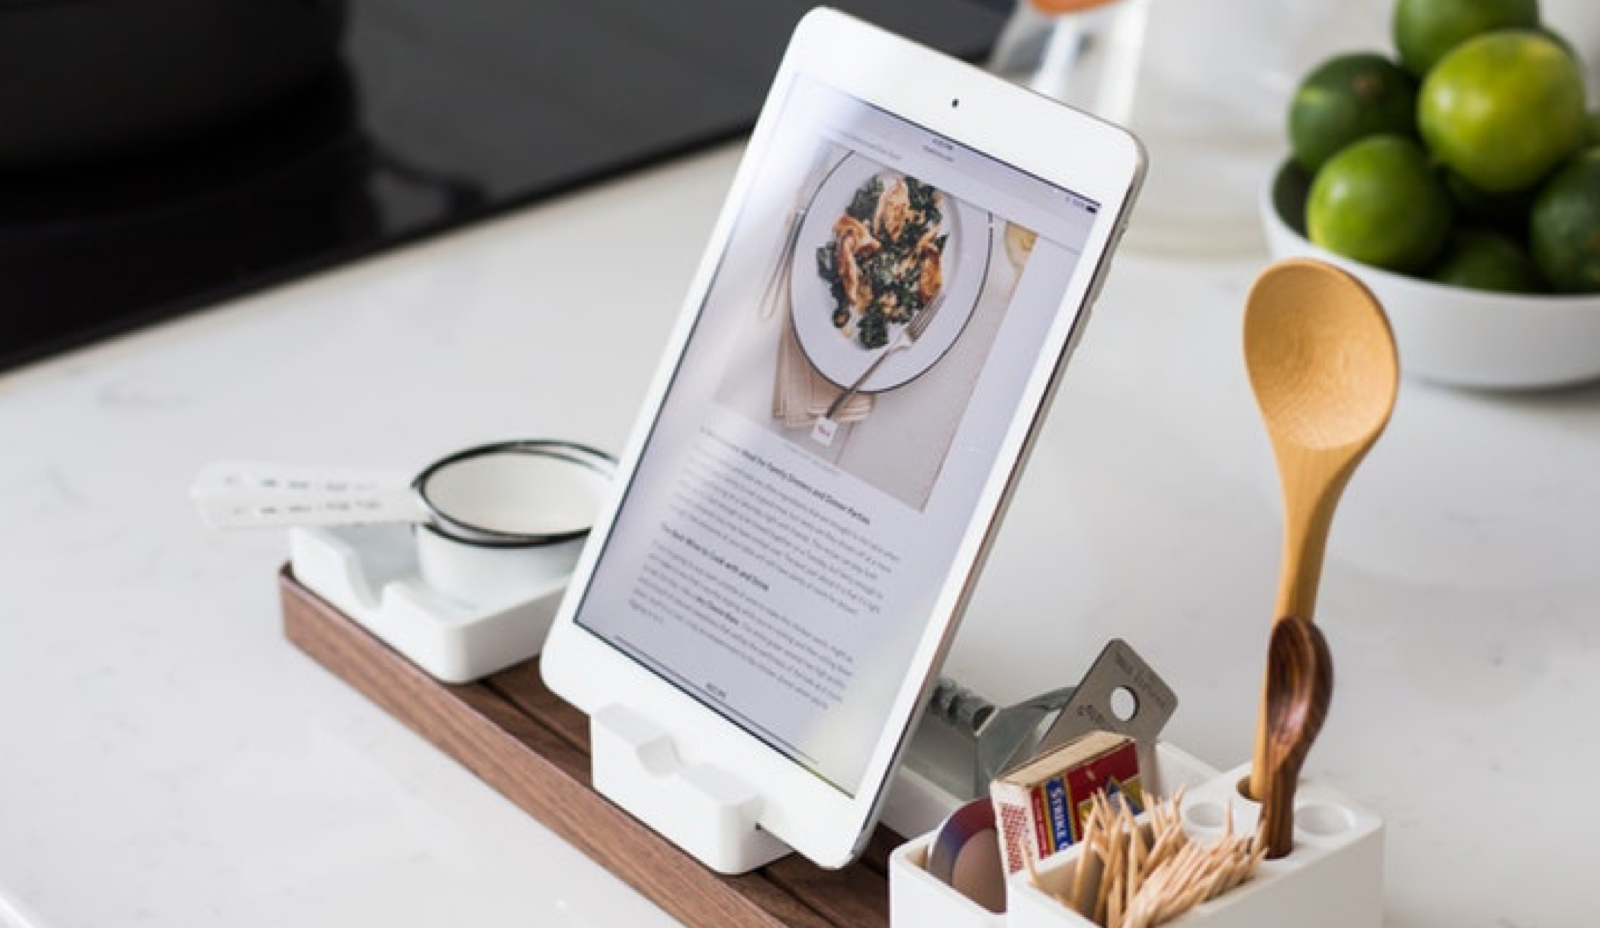 Support holding a tablet displaying a recipe sitting besides wooden spoons and other kitchen utensils.